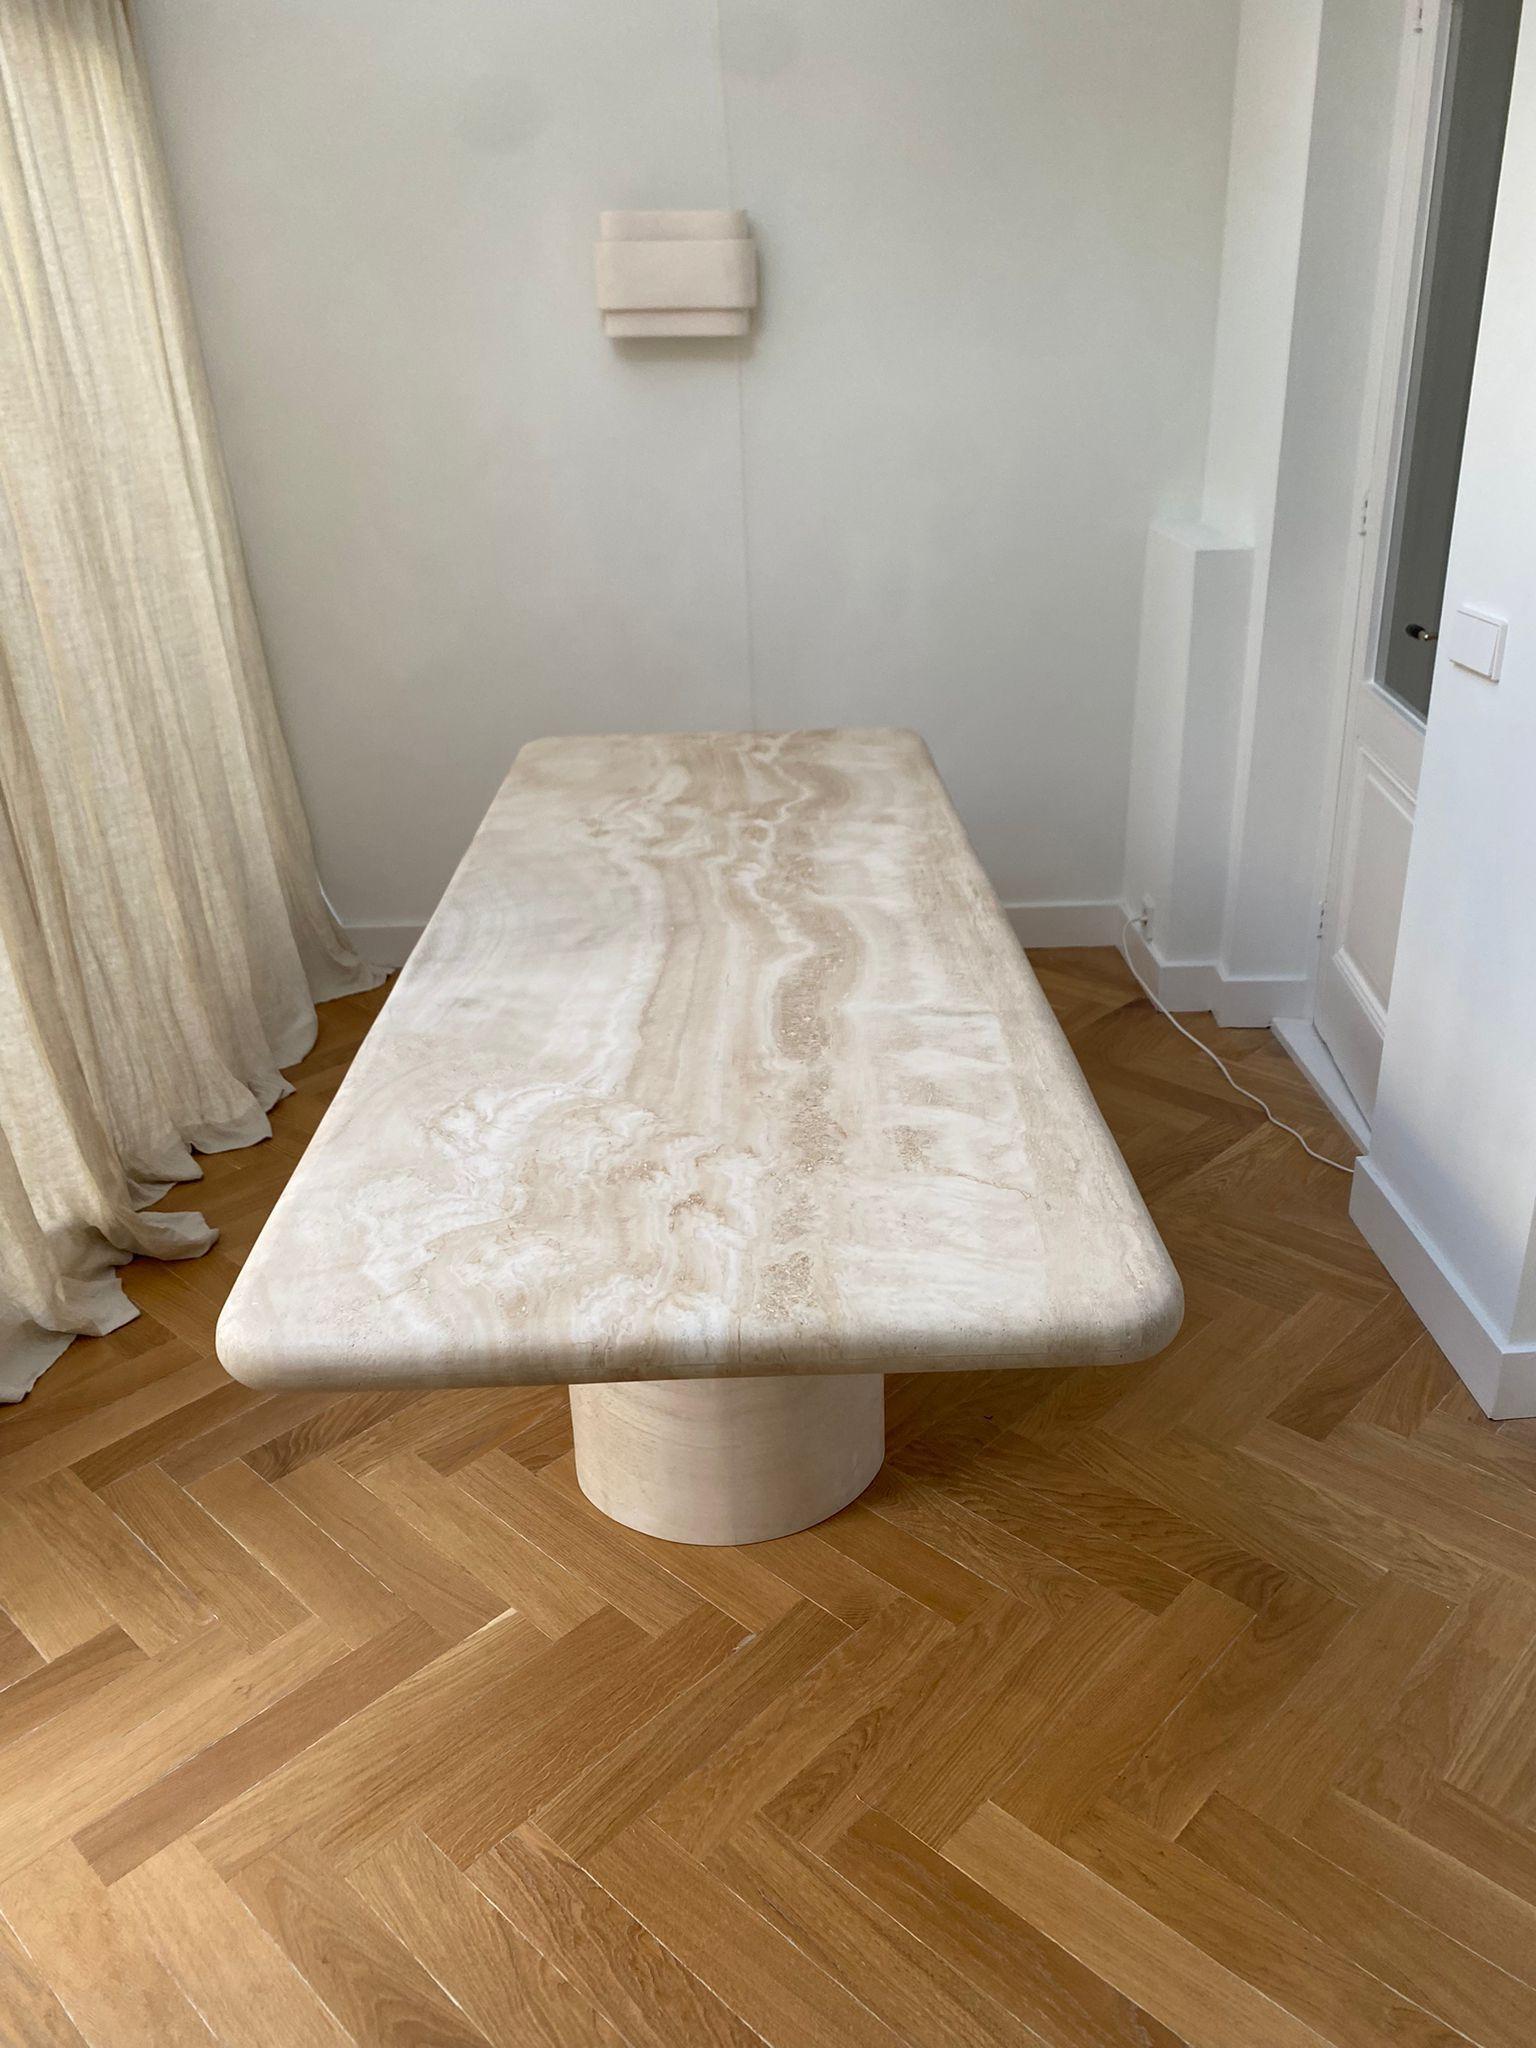 A functional sculpture of the room. This organic modern minimalist table is made from tumbled travertine, featuring a thick table top with curved edges that elegantly sits on a curved cylindrical column. 

The striking table top is 6cm thick which